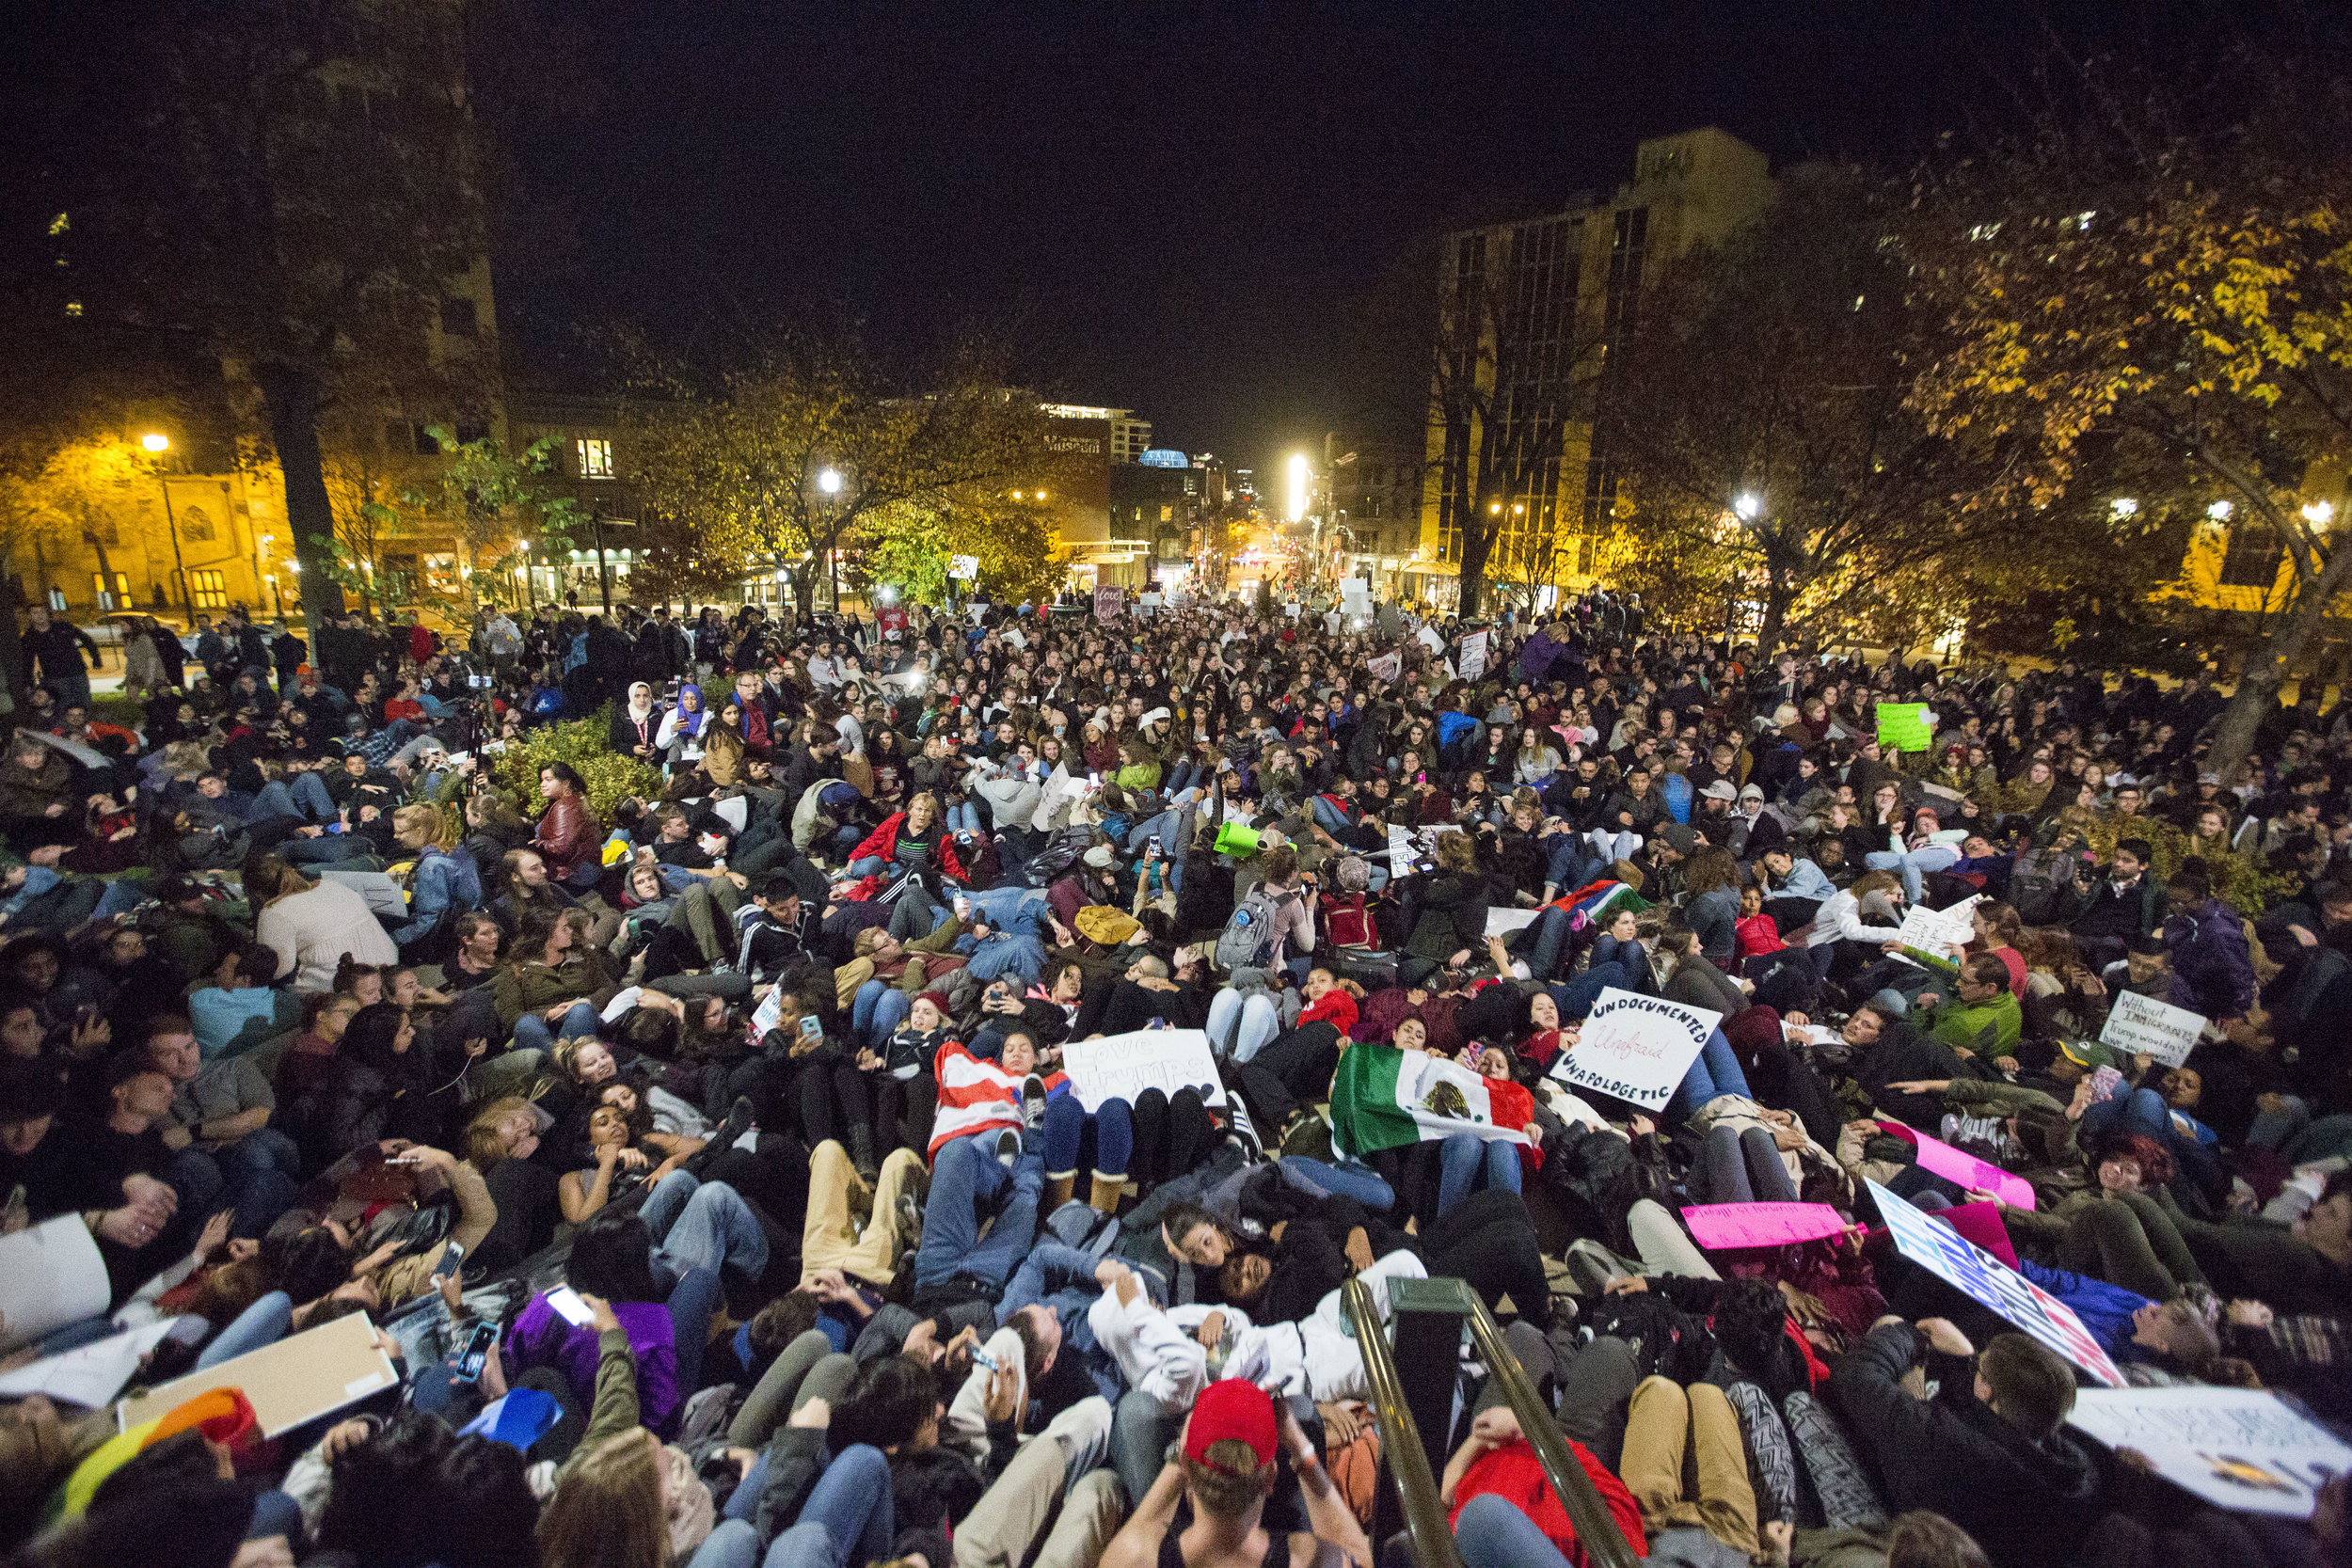  Protesters lay down outside the Capitol building for a moment of silence during an anti-Trump rally on Nov 10, 2016 in Madison, WI. 